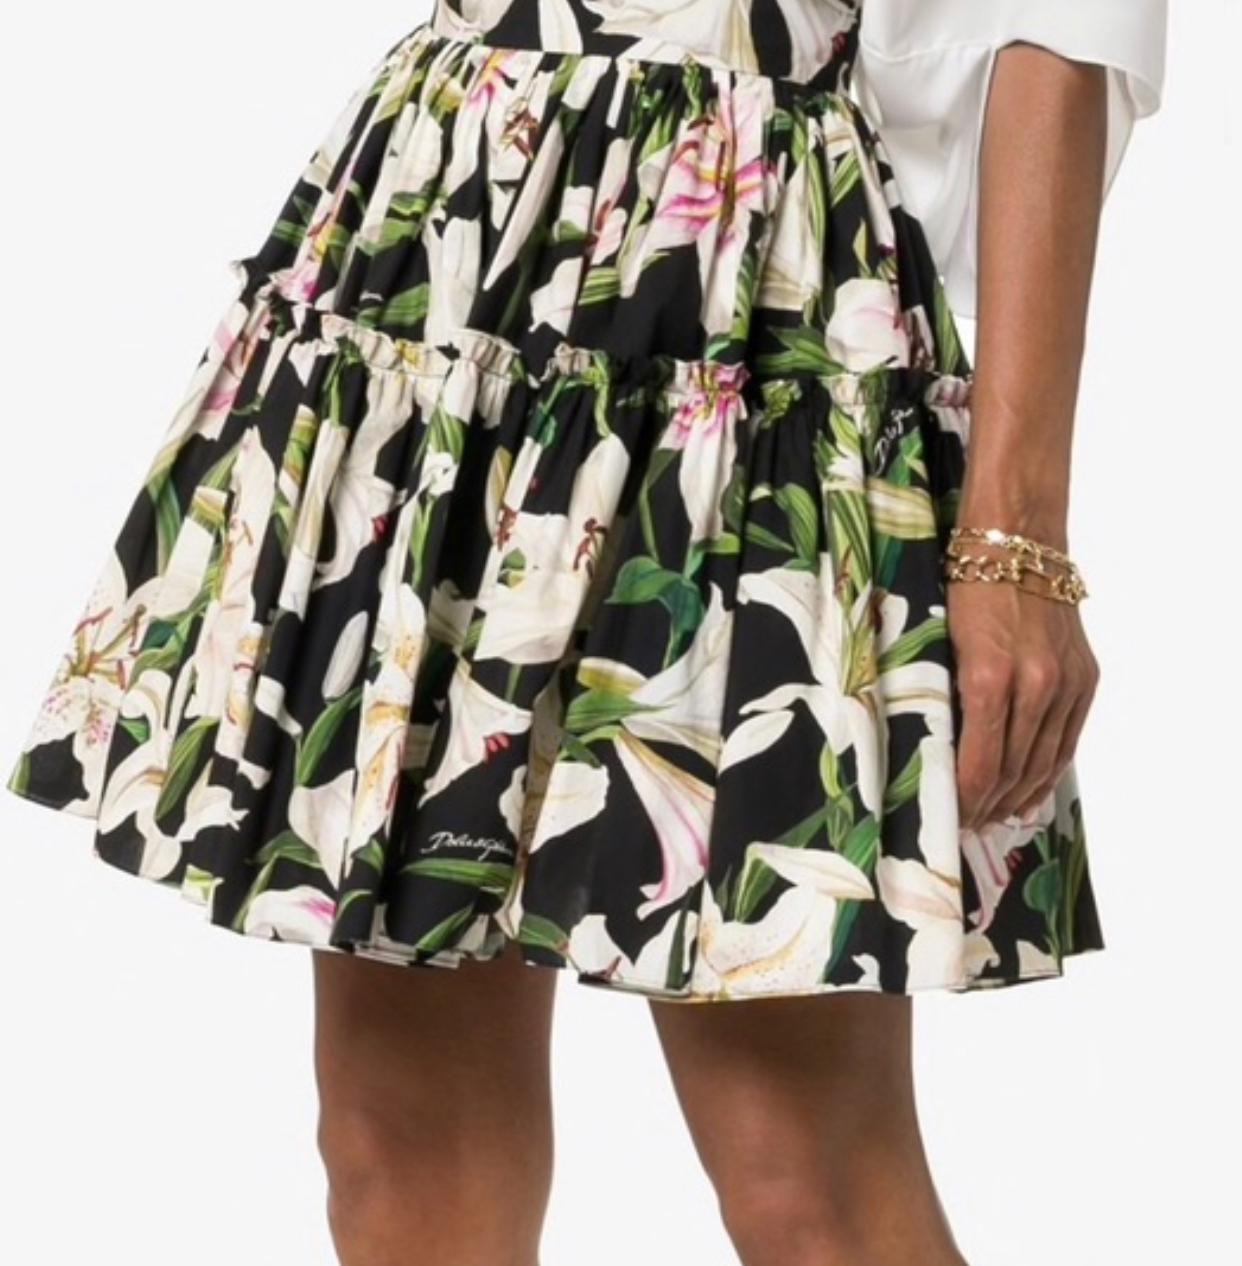 Stunning Lilly print cotton flared skirt
from Dolce & Gabbana.

The ruffled design and delightful lilly
print will move perfectly in the soft
warm breeze. Featuring a high waist, a
concealed fastening, a tiered design, a
ruffle trimming and a short